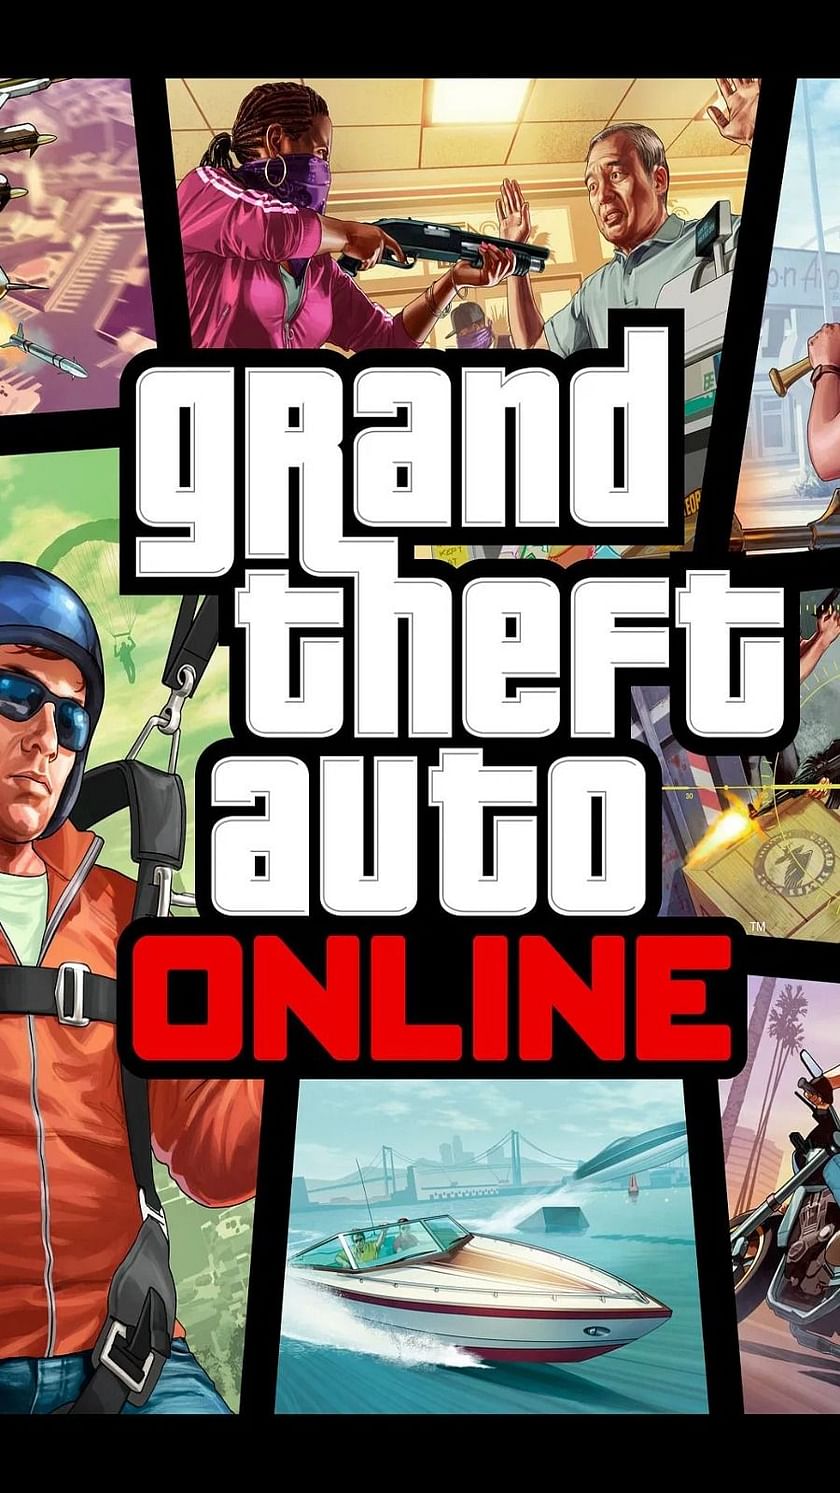 GTA Online for PlayStation 3 and Xbox 360 Will Shut Down on